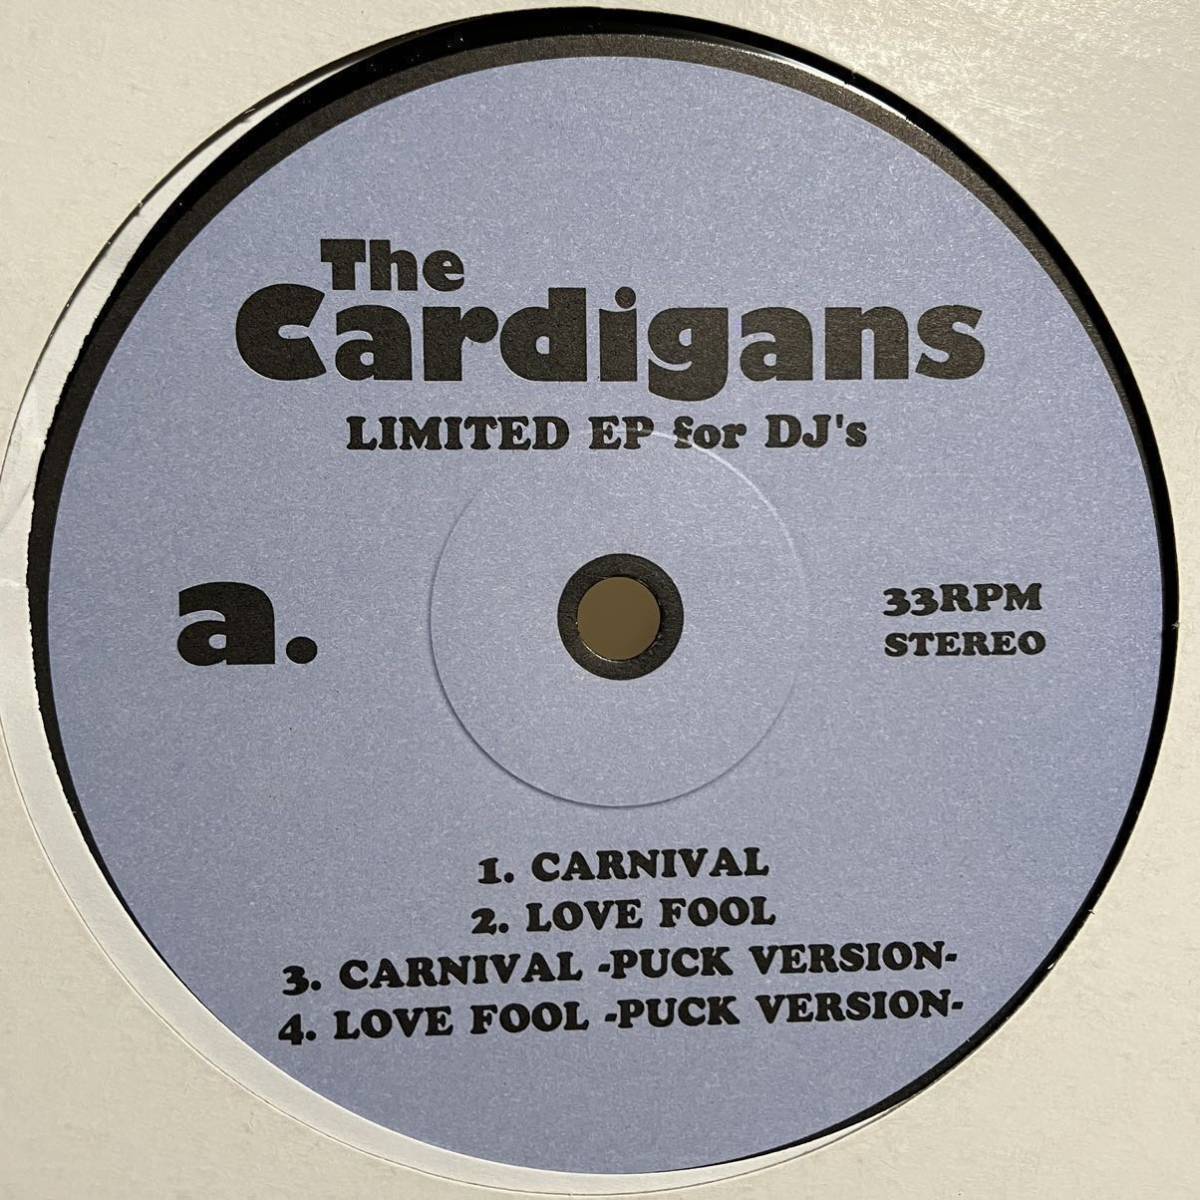 [Эта доска только ремикс] EP Cardigans Limited For For Carnival Love Funky Mix Tee's Club Radio